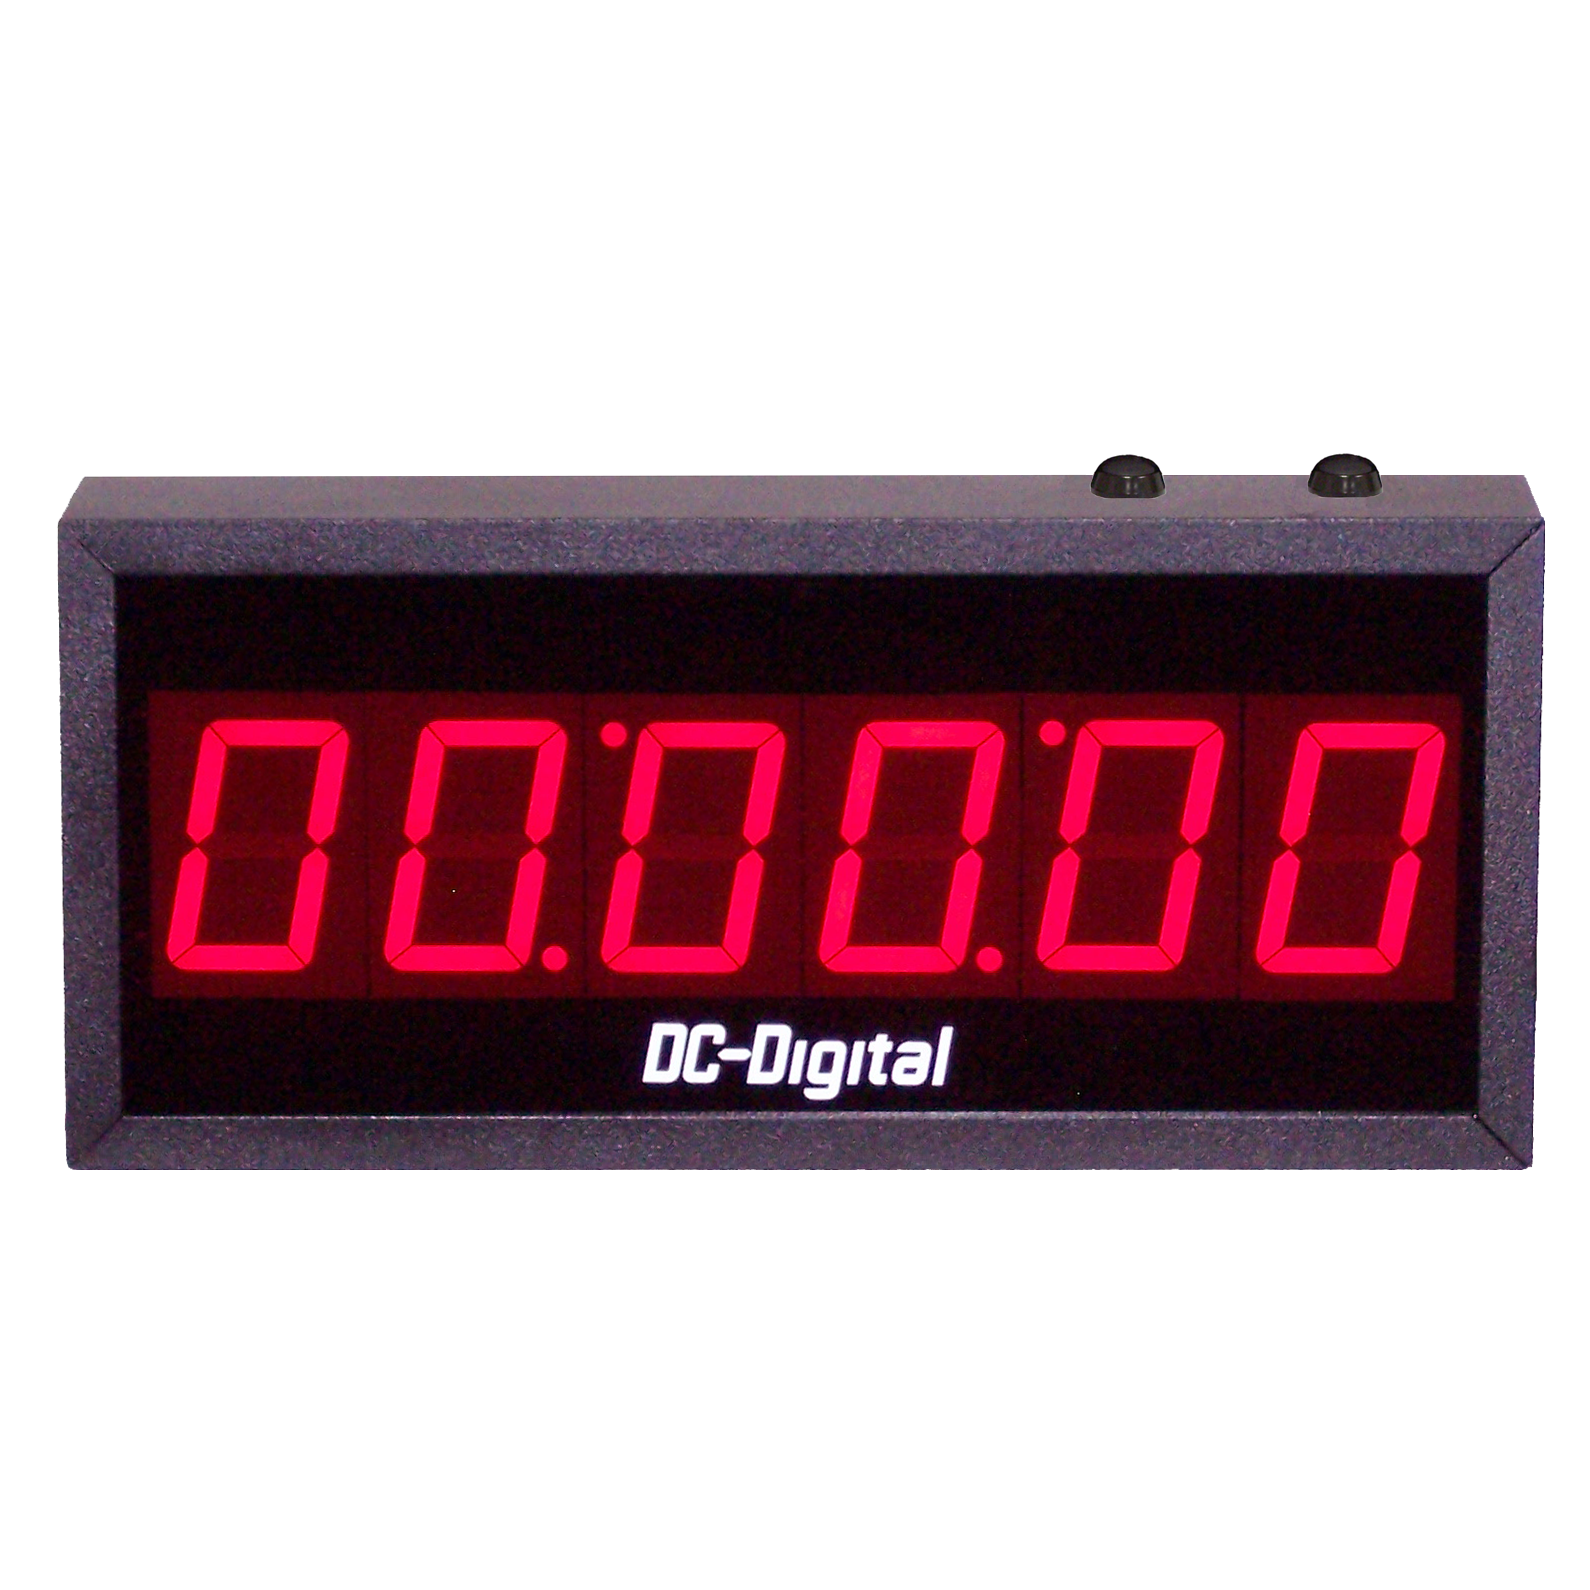 (DC-256T-UP) 2.3 Inch LED Digital, Push-Button Controlled, Count Up Timer, Hours, Minutes, Seconds